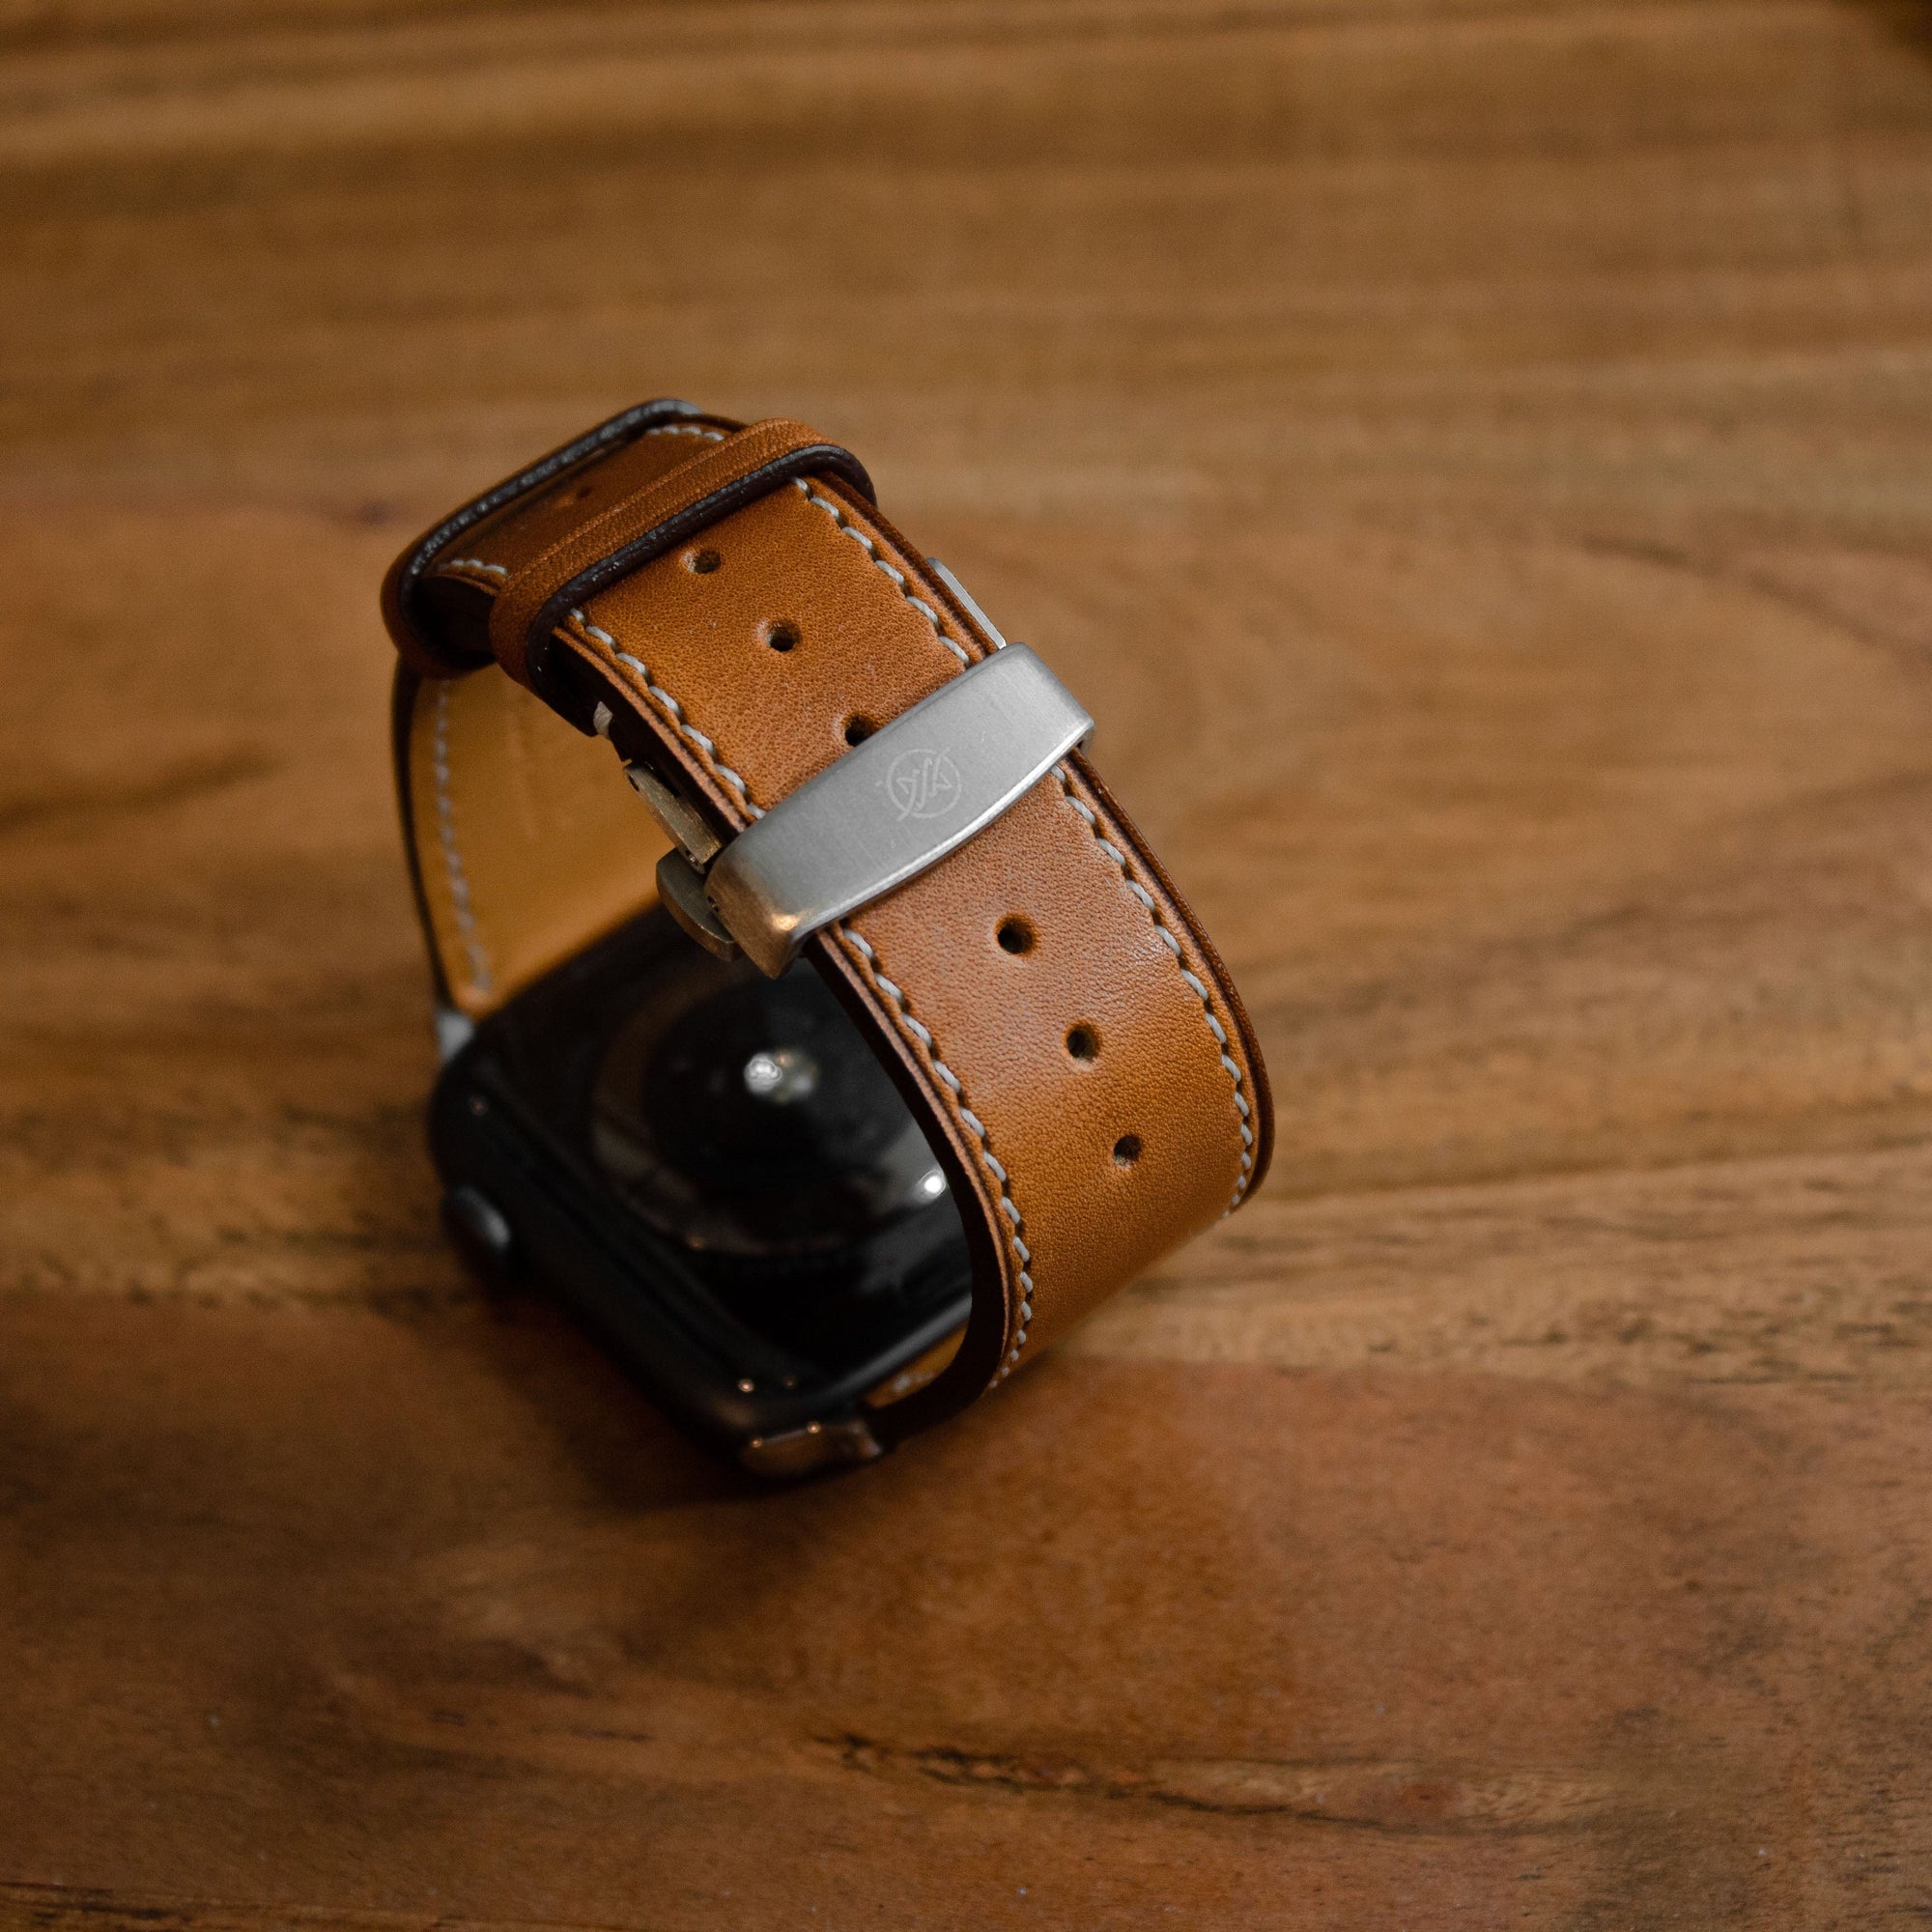 Barenia Monetial Leather Watch Bands For Apple Watch | Premium Barenia Leather